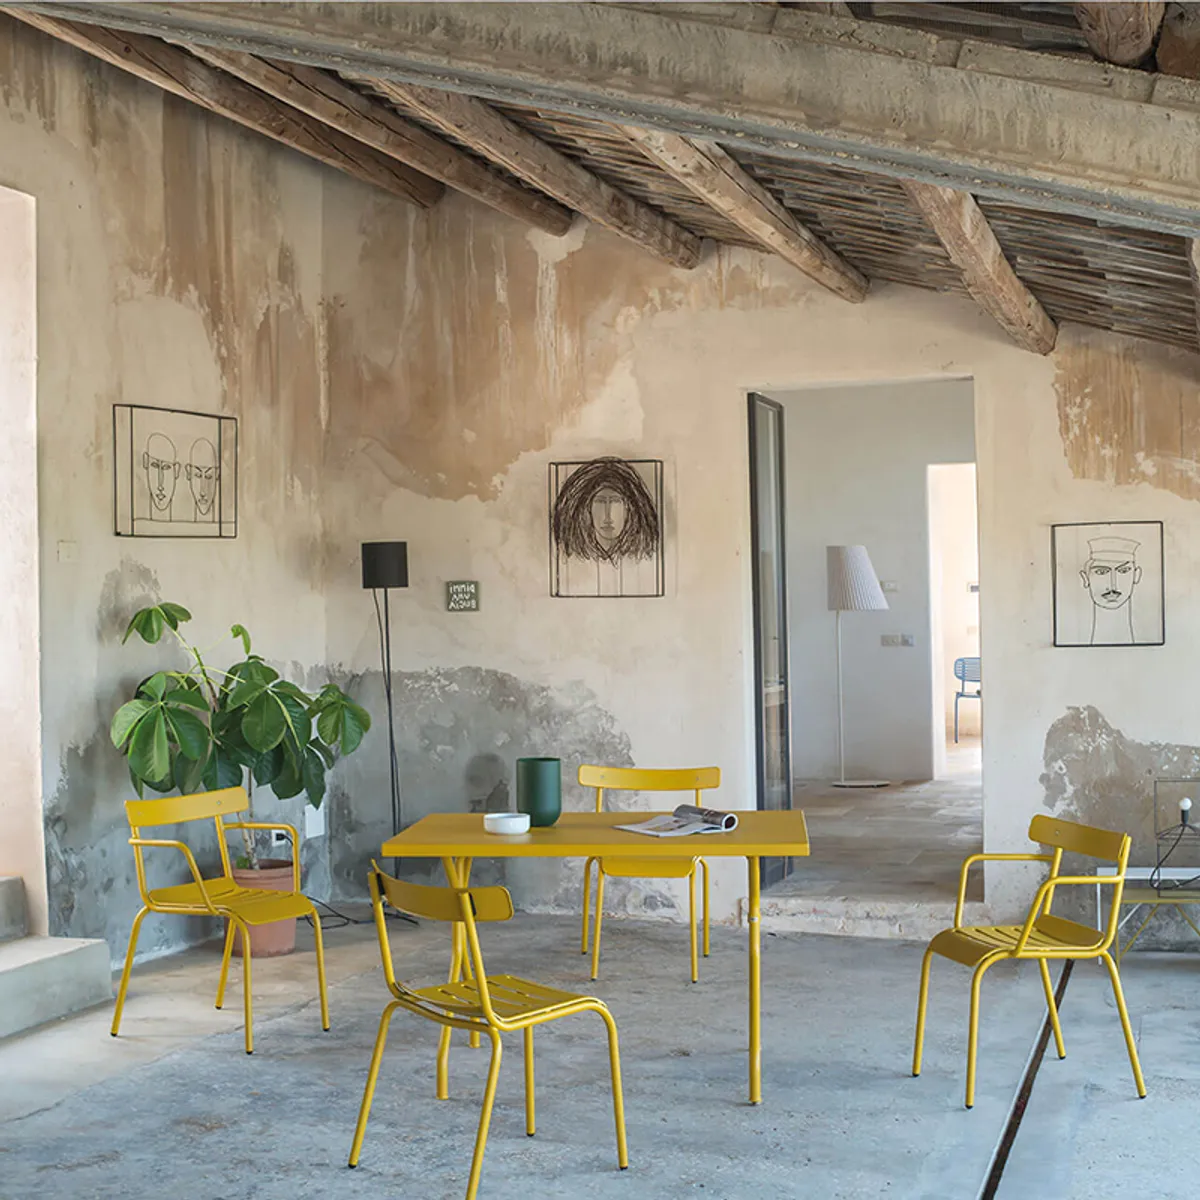 Milky Chairs In Yellow Metal Exterior Furniture For The Terrace By Insideoutcontracts